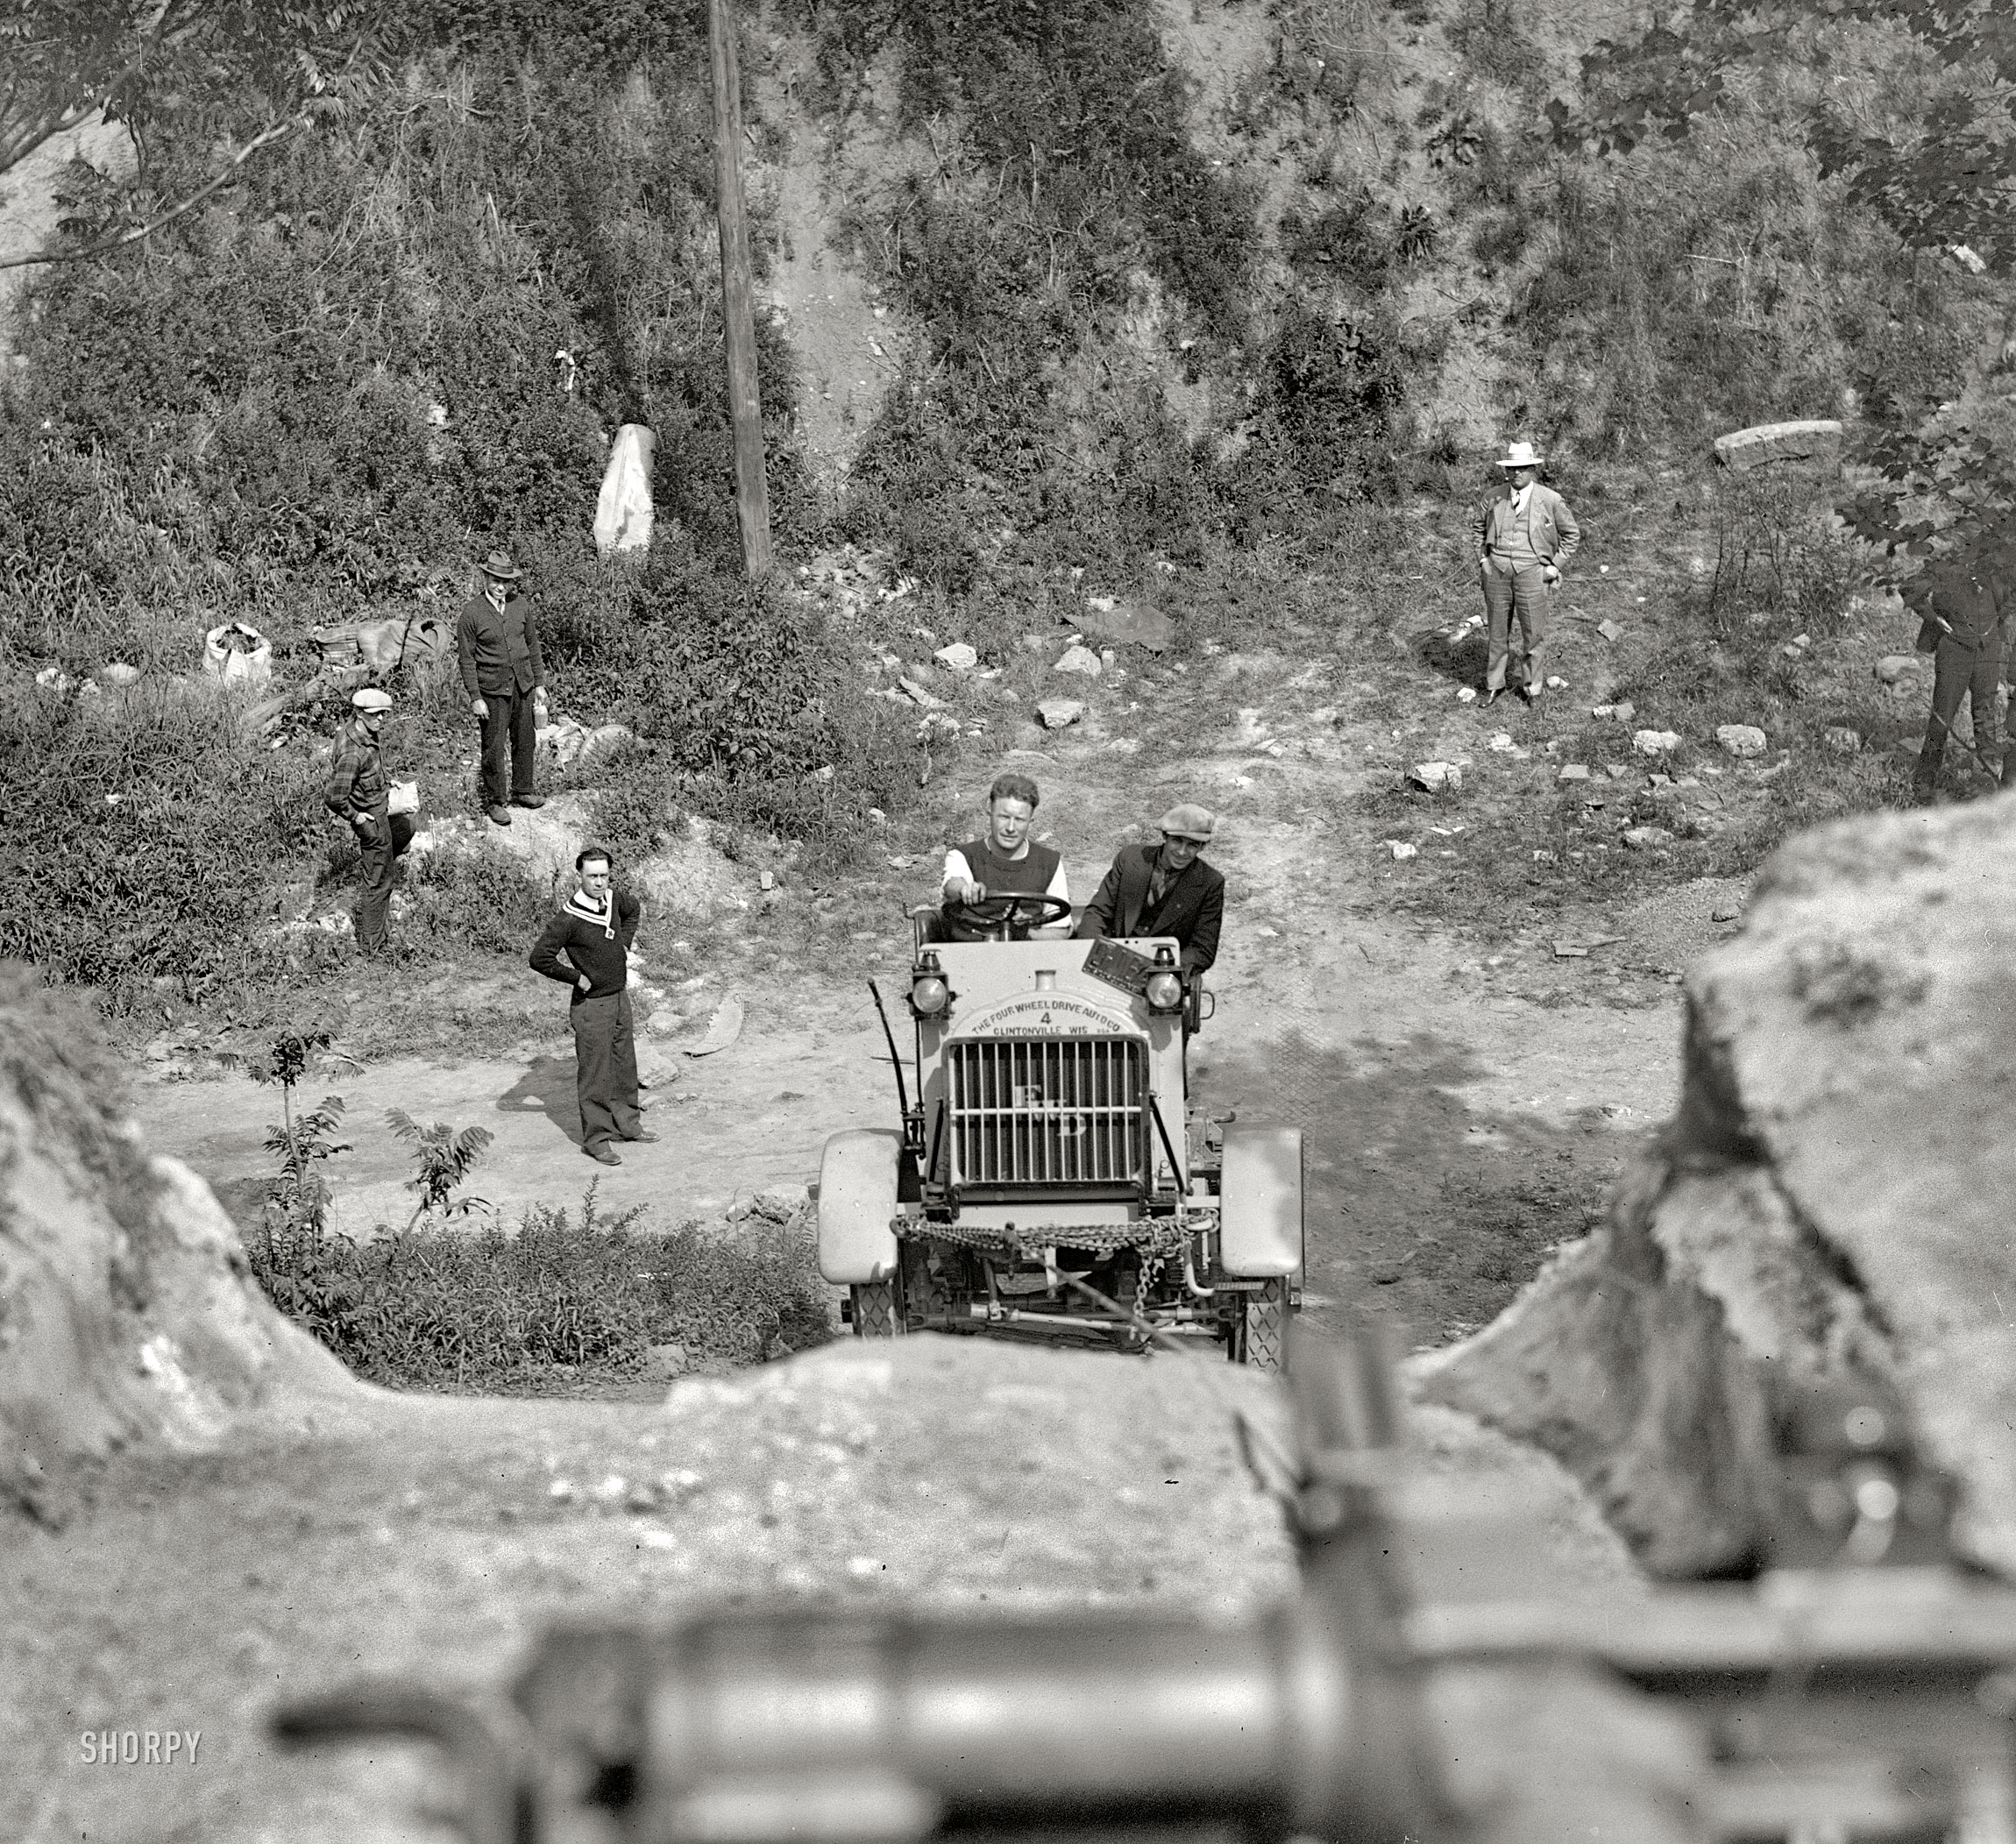 Washington, D.C., circa 1928. "Demonstration of Four Wheel Drive truck." Another view of the exciting truck trials first glimpsed here and here. National Photo Company Collection glass negative. View full size.